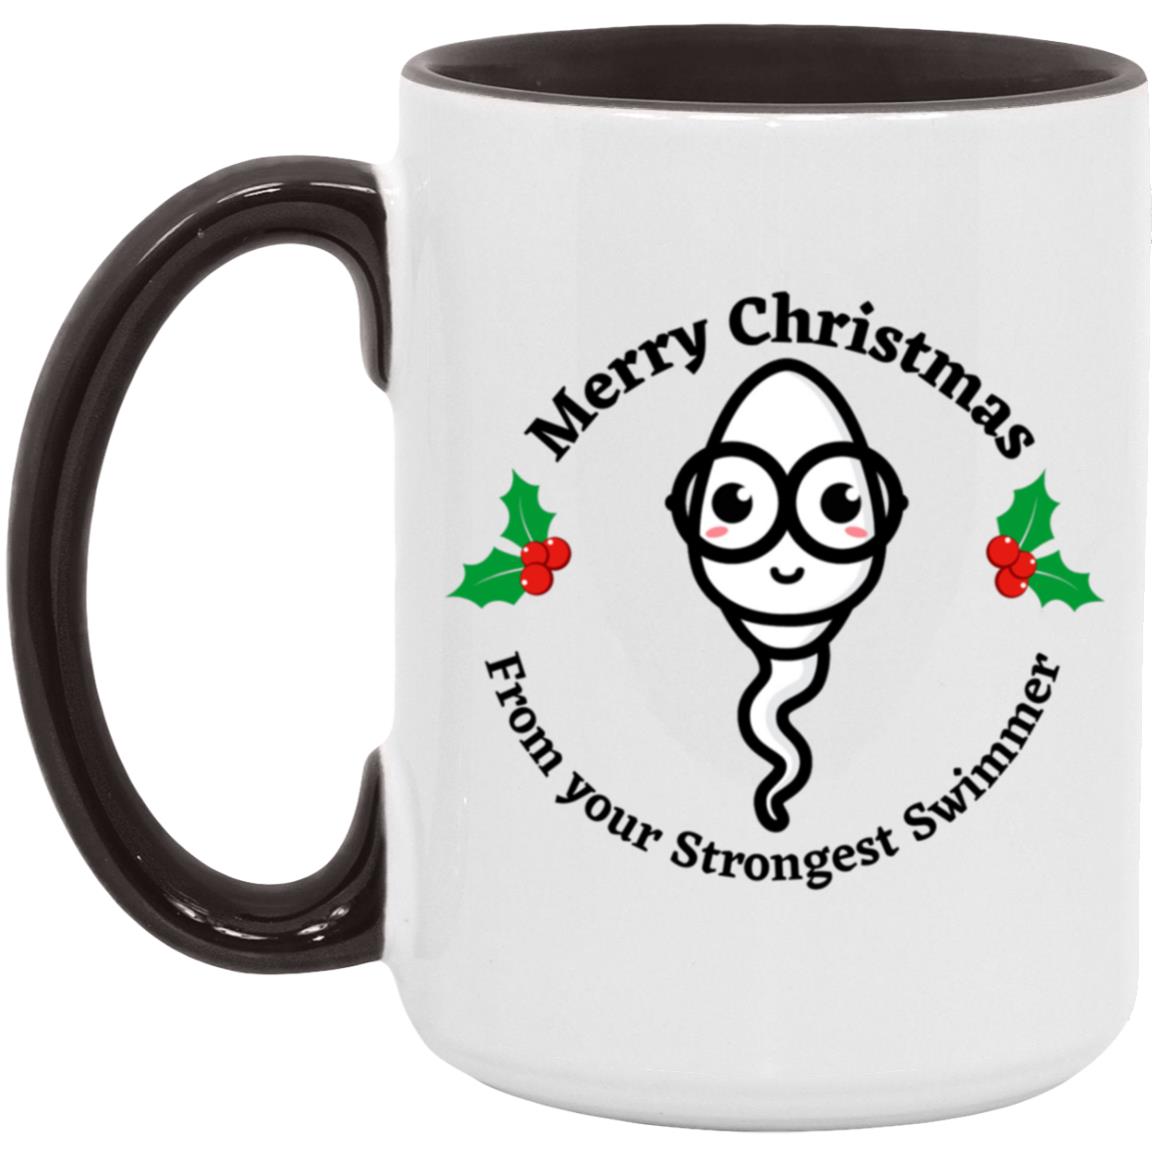 Merry Christmas From Your Strongest Swimmer (Glasses Christmas Sperm)15oz Accent Mug